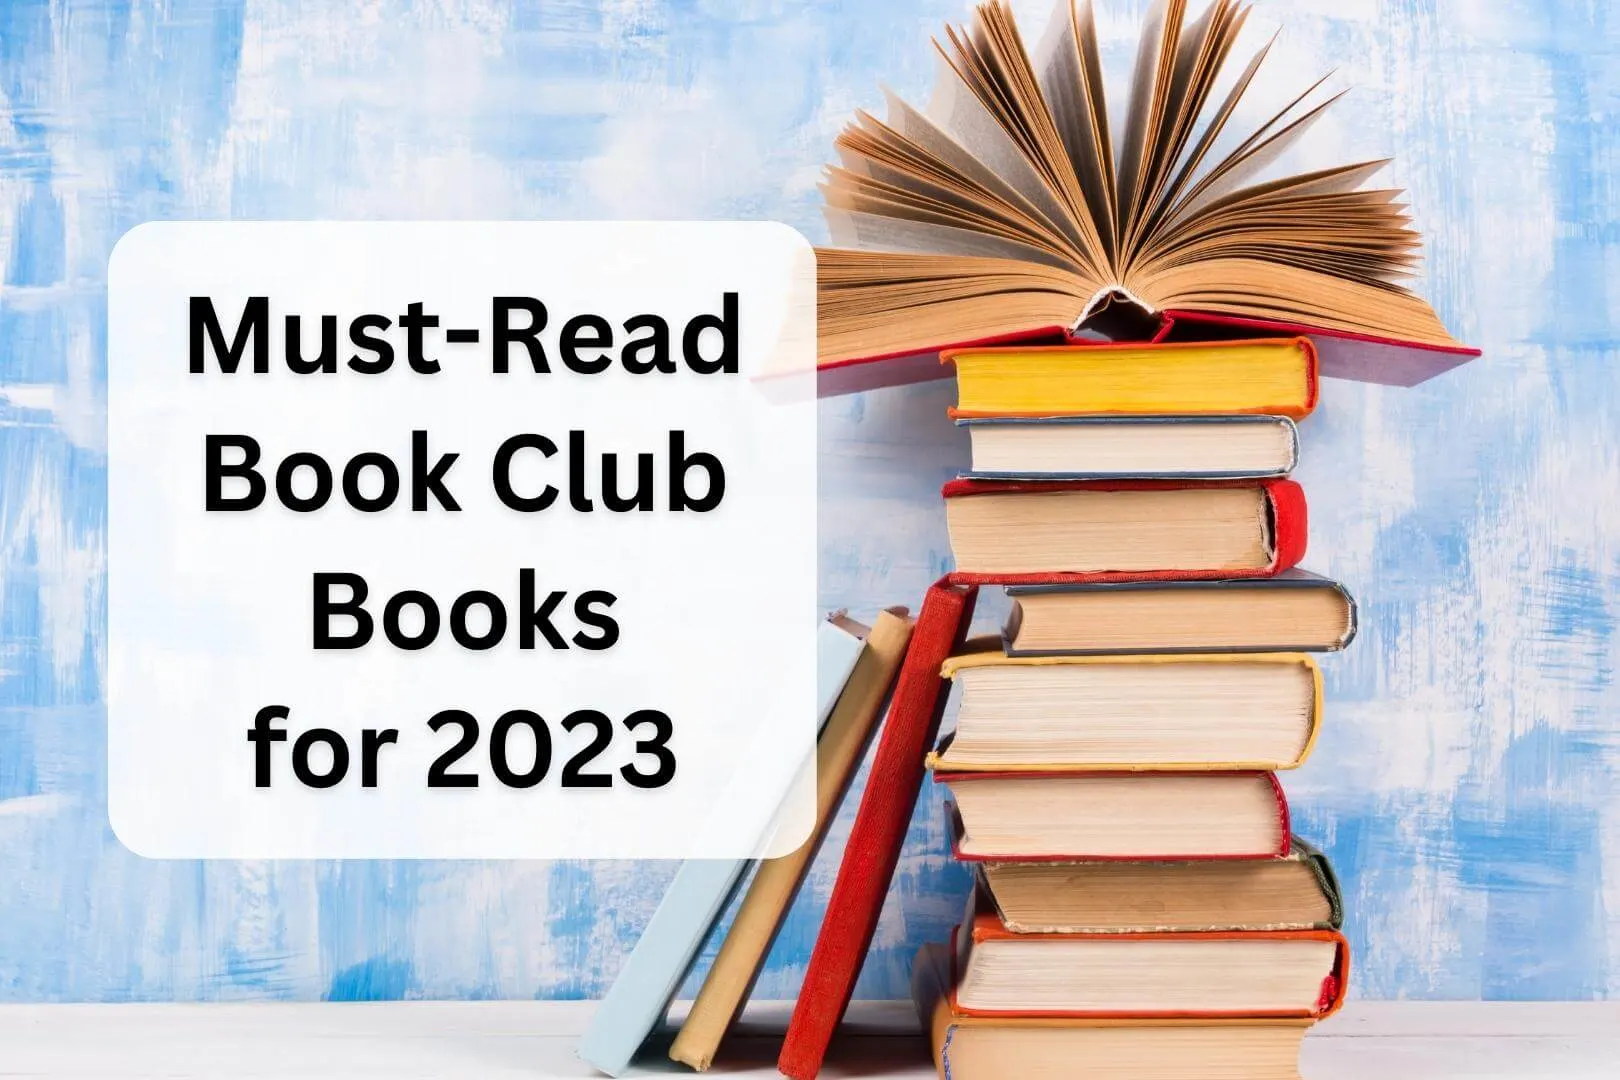 Must-Read Book Club Books for 2023 - Book Club Chat